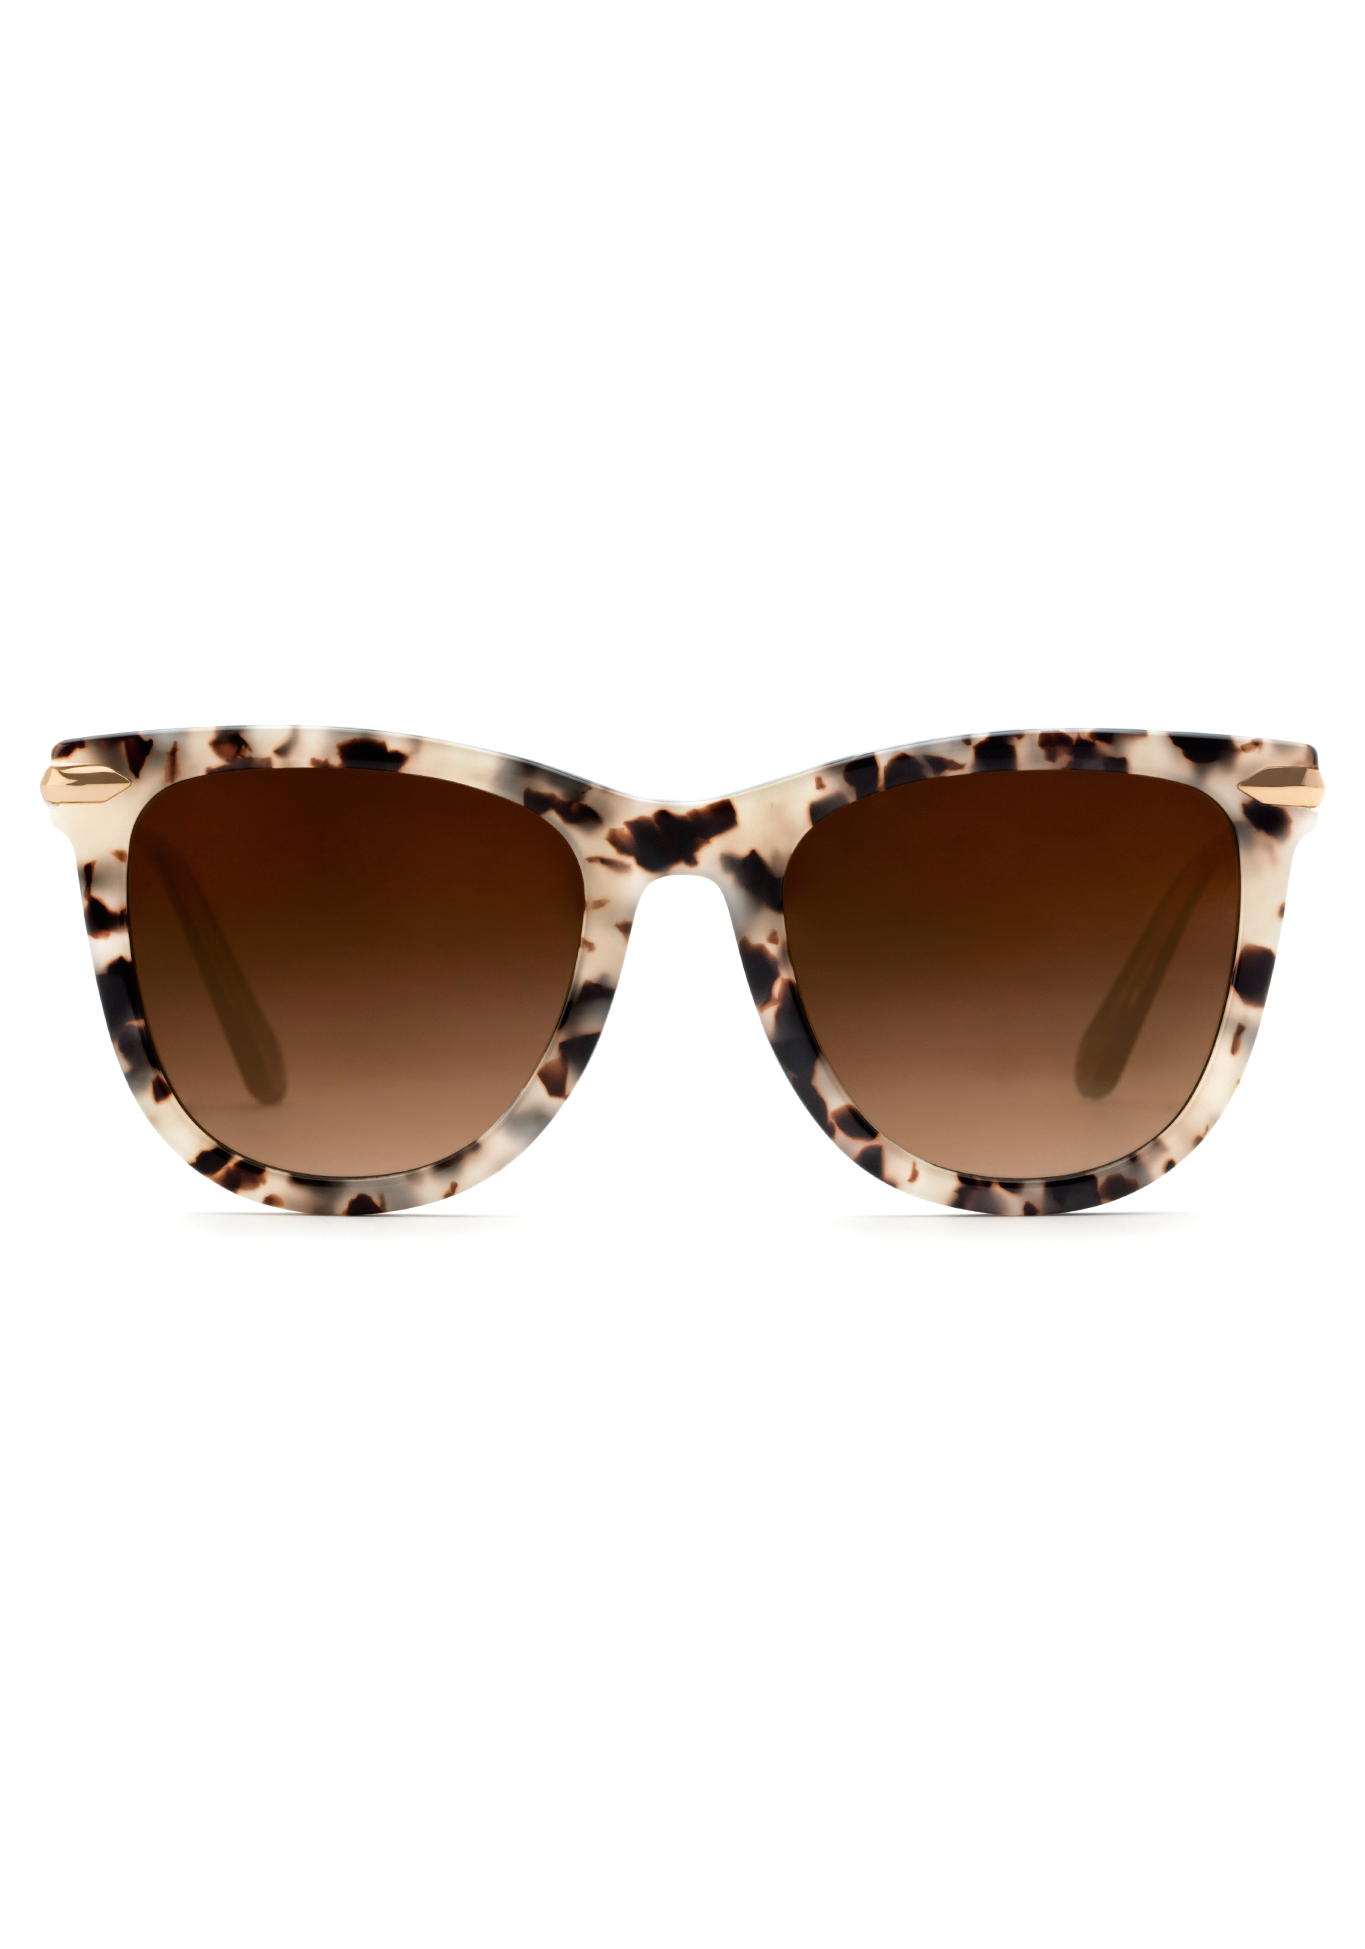 KREWE SIMONE - Oyster + Black and Crystal 24K - Women Square Sunglasses - 53